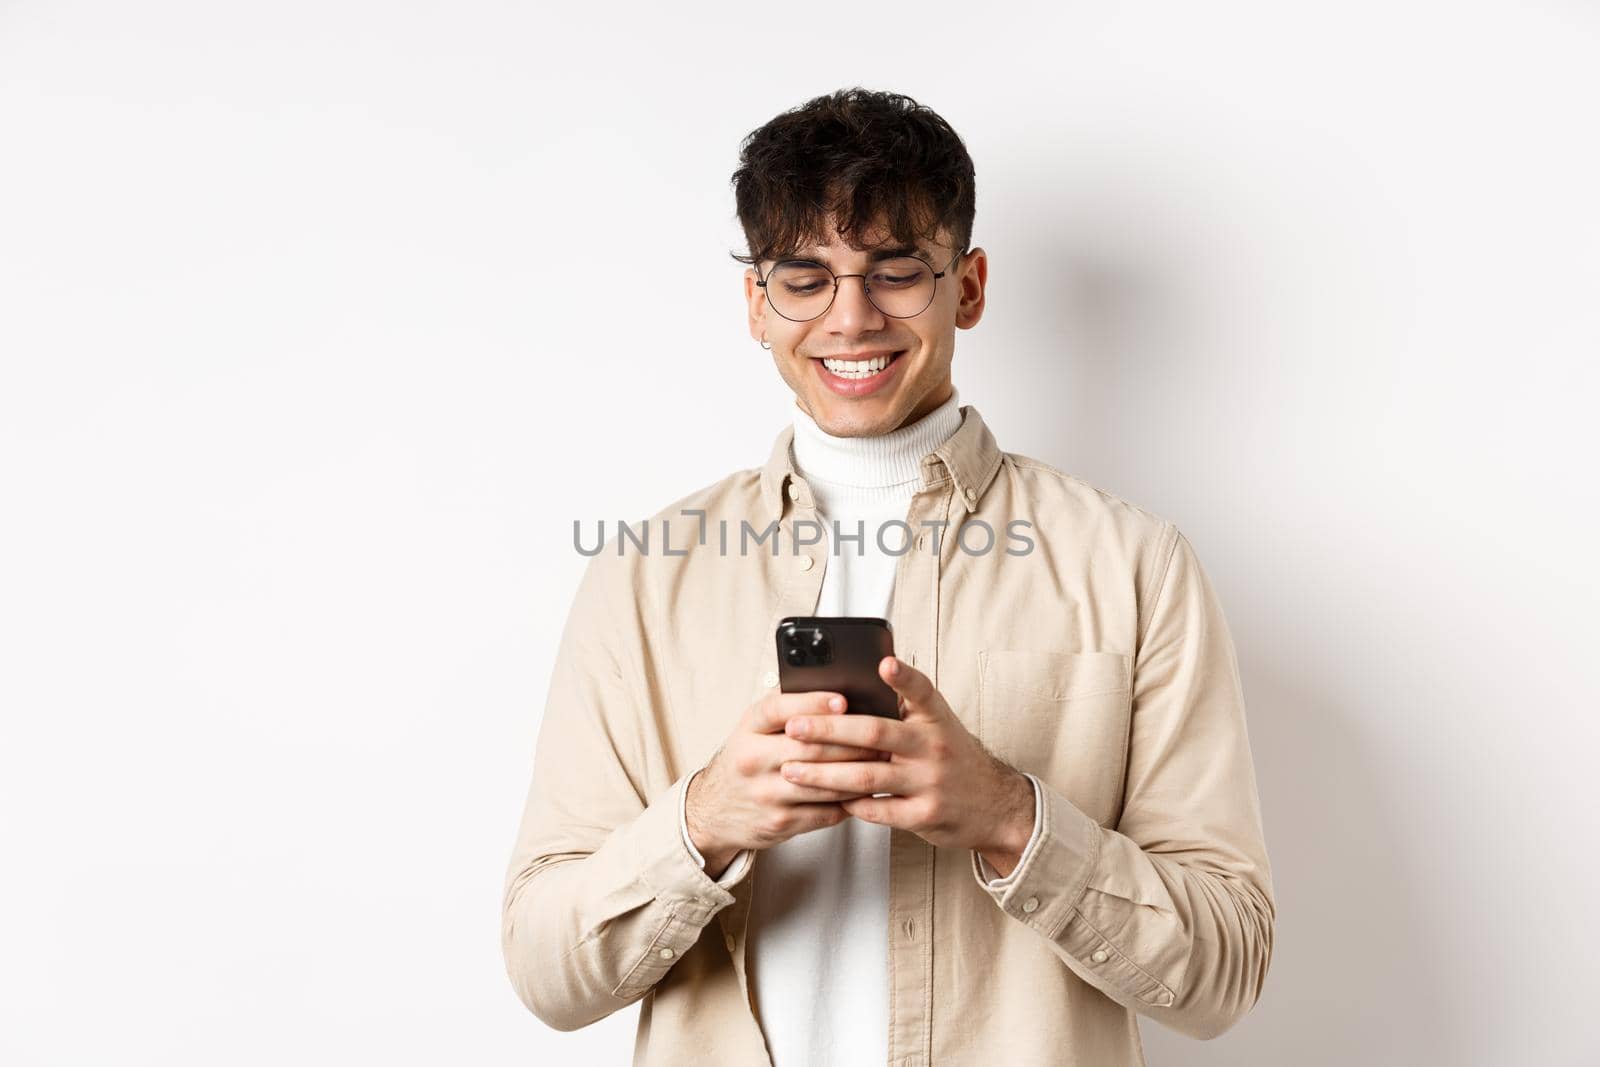 Real people. Natural young man reading message on mobile phone, smiling and looking at smartphone screen, standing on white background.